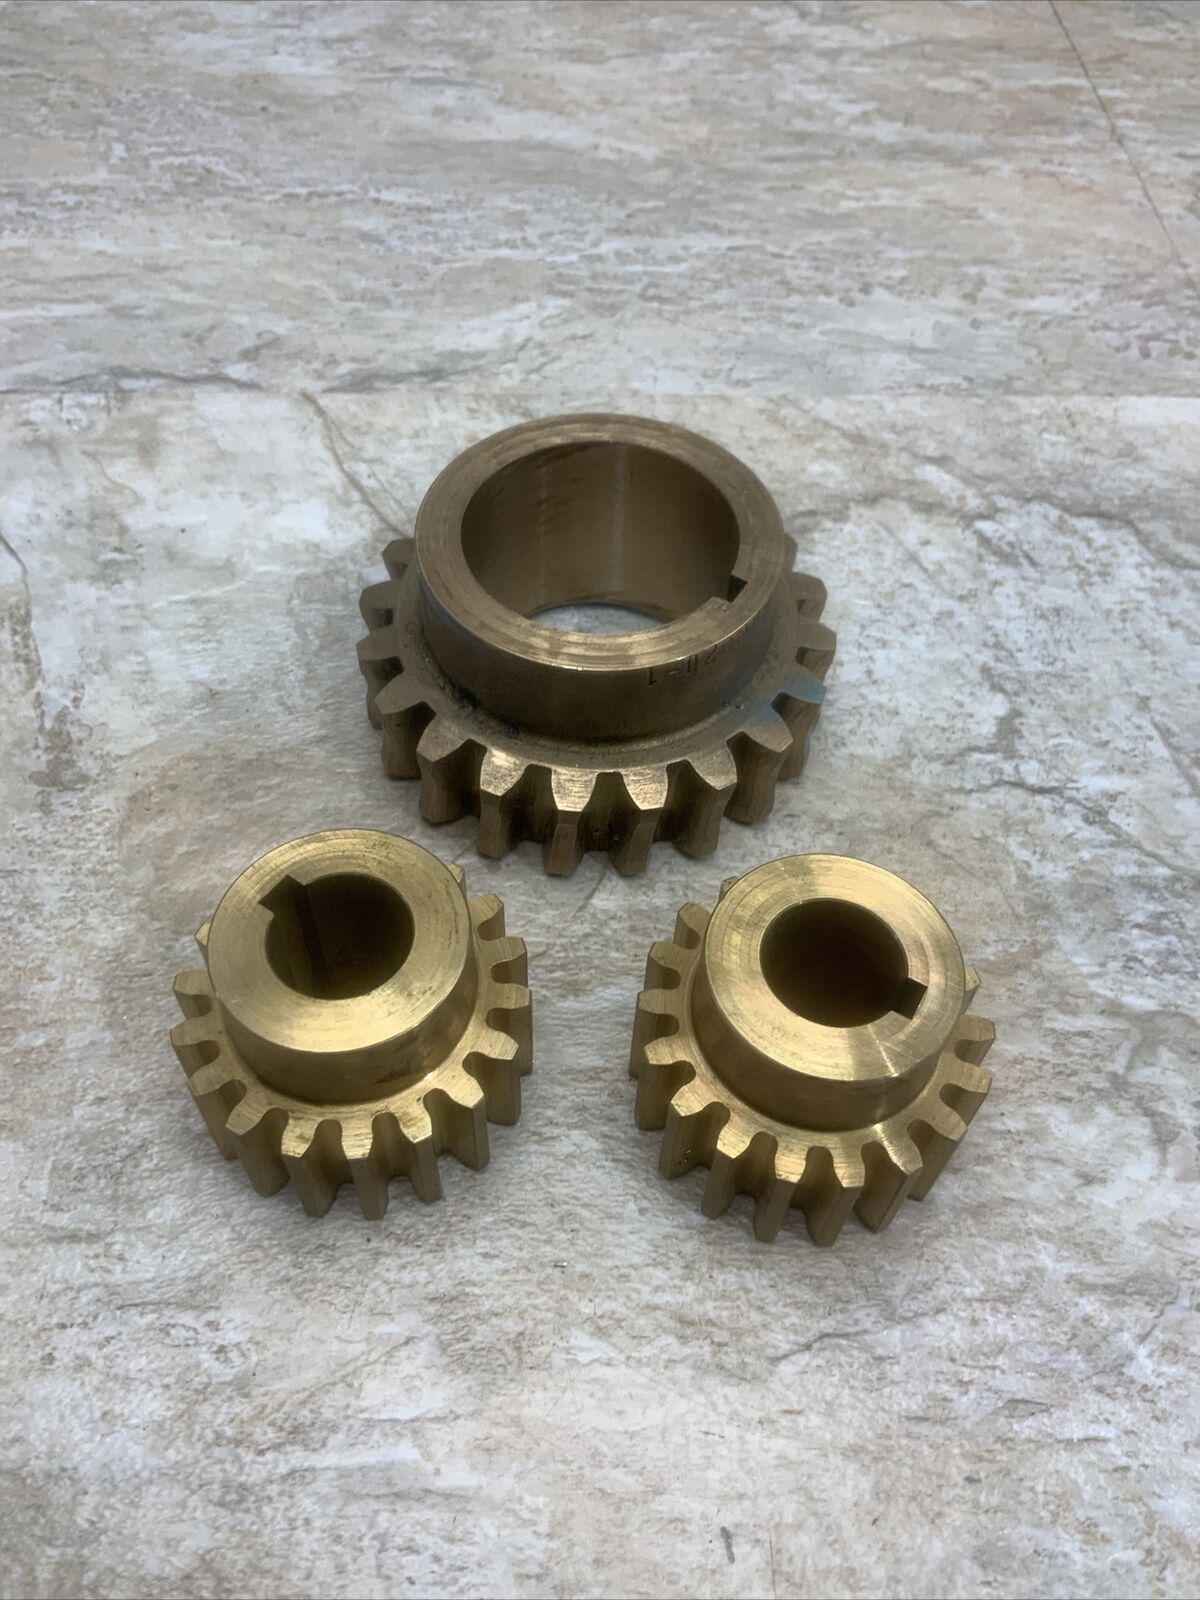 Lot of 3 Brass Gears for Parts Steampunk Art Craft Project Industrial ￼